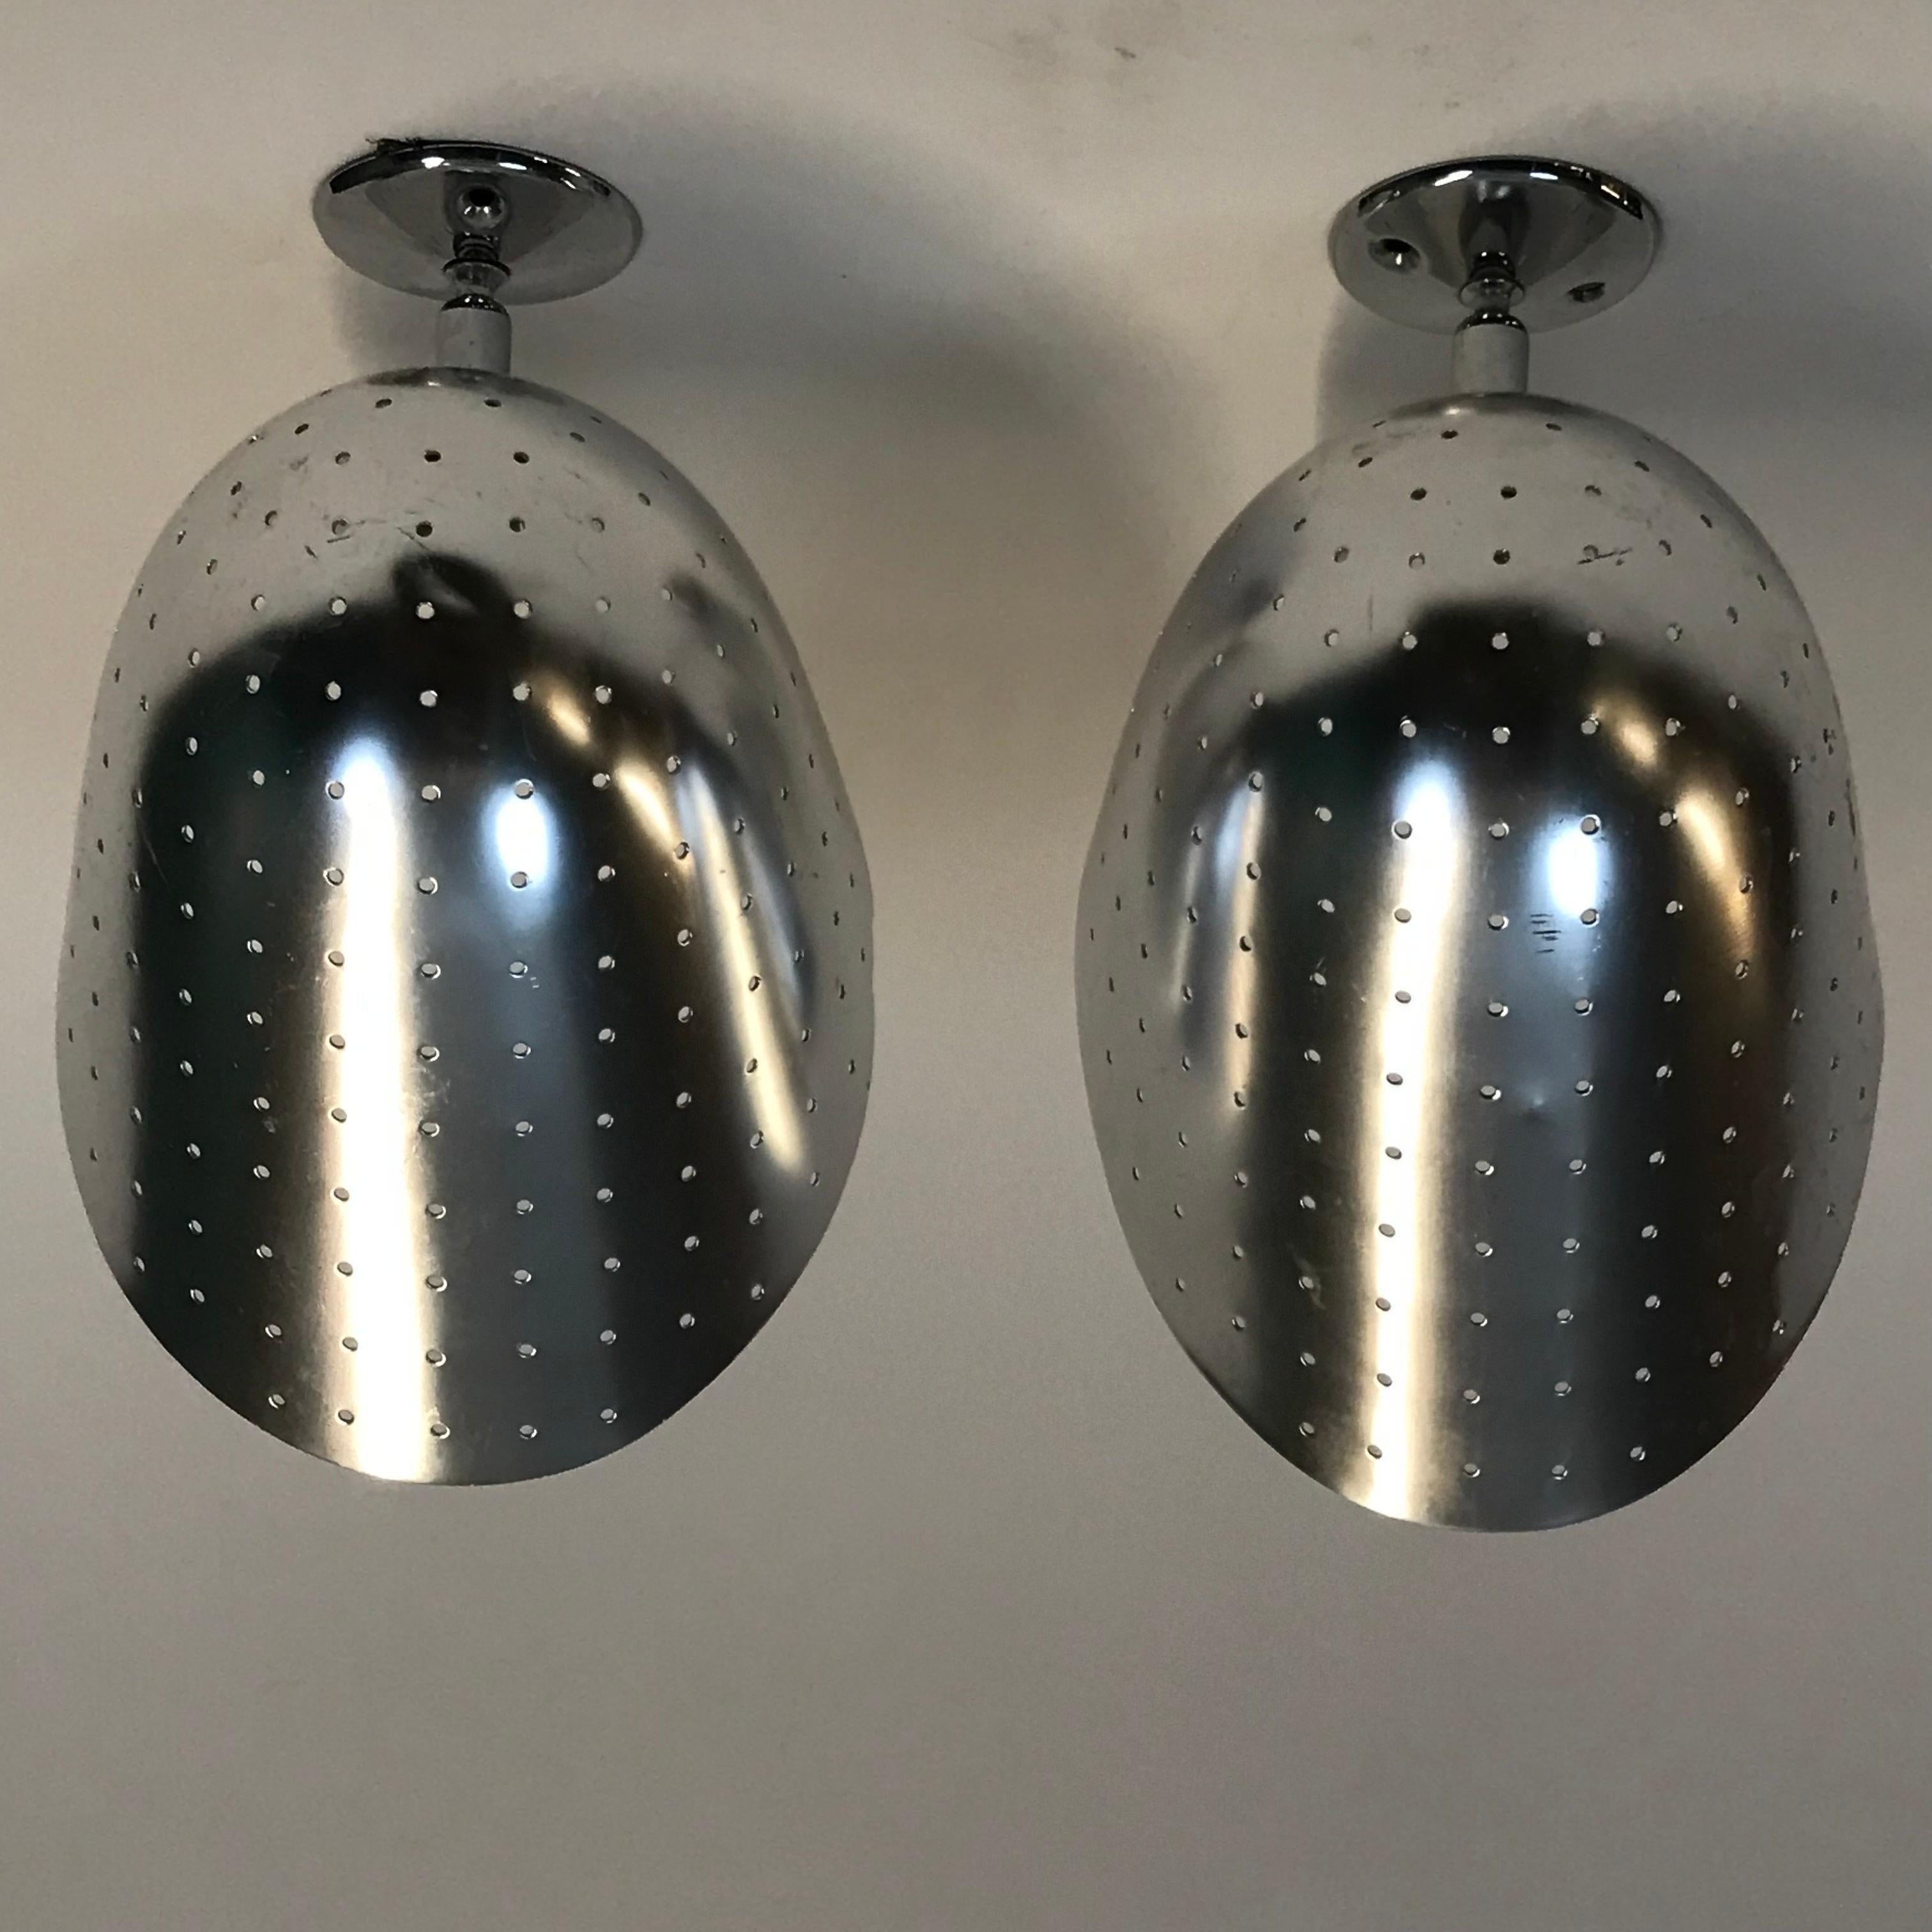 Aluminum Pair of 1950’s Perforated Spun Aluminium English Sconces by Courtney Pope